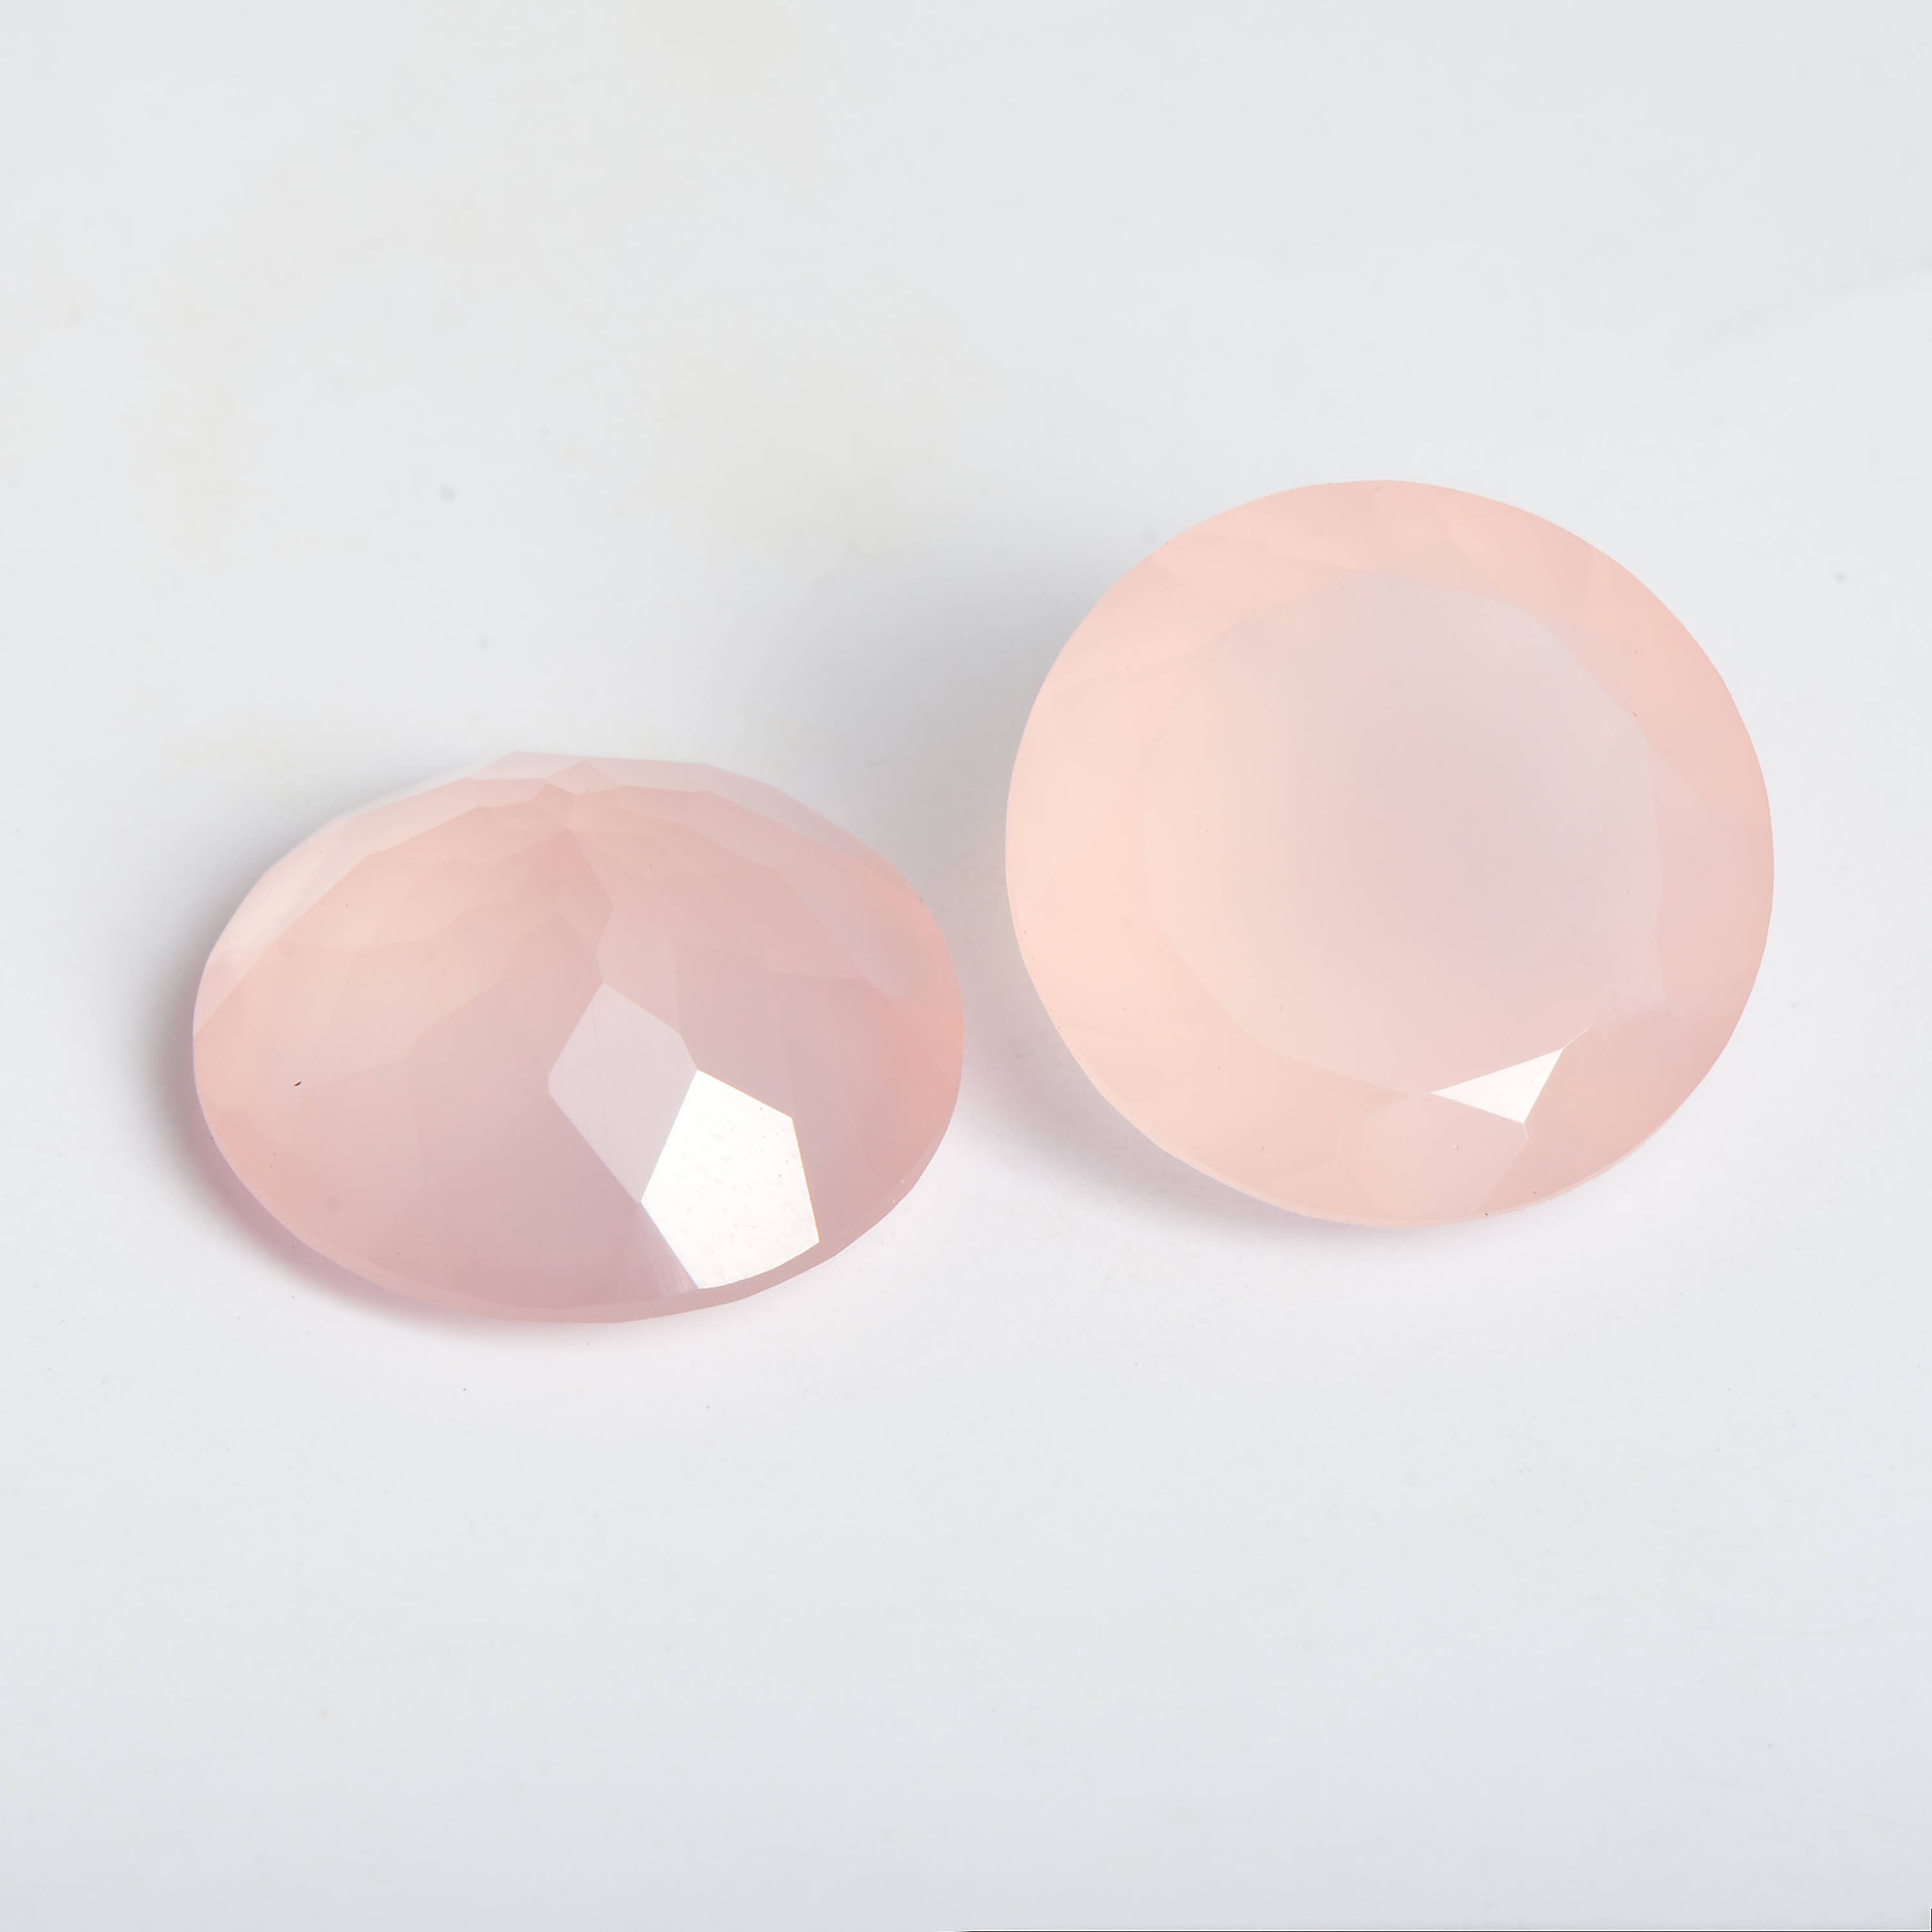 Natural Rose Chalcedony Calibrated Size 16mm Round Faceted Cut - Etsy